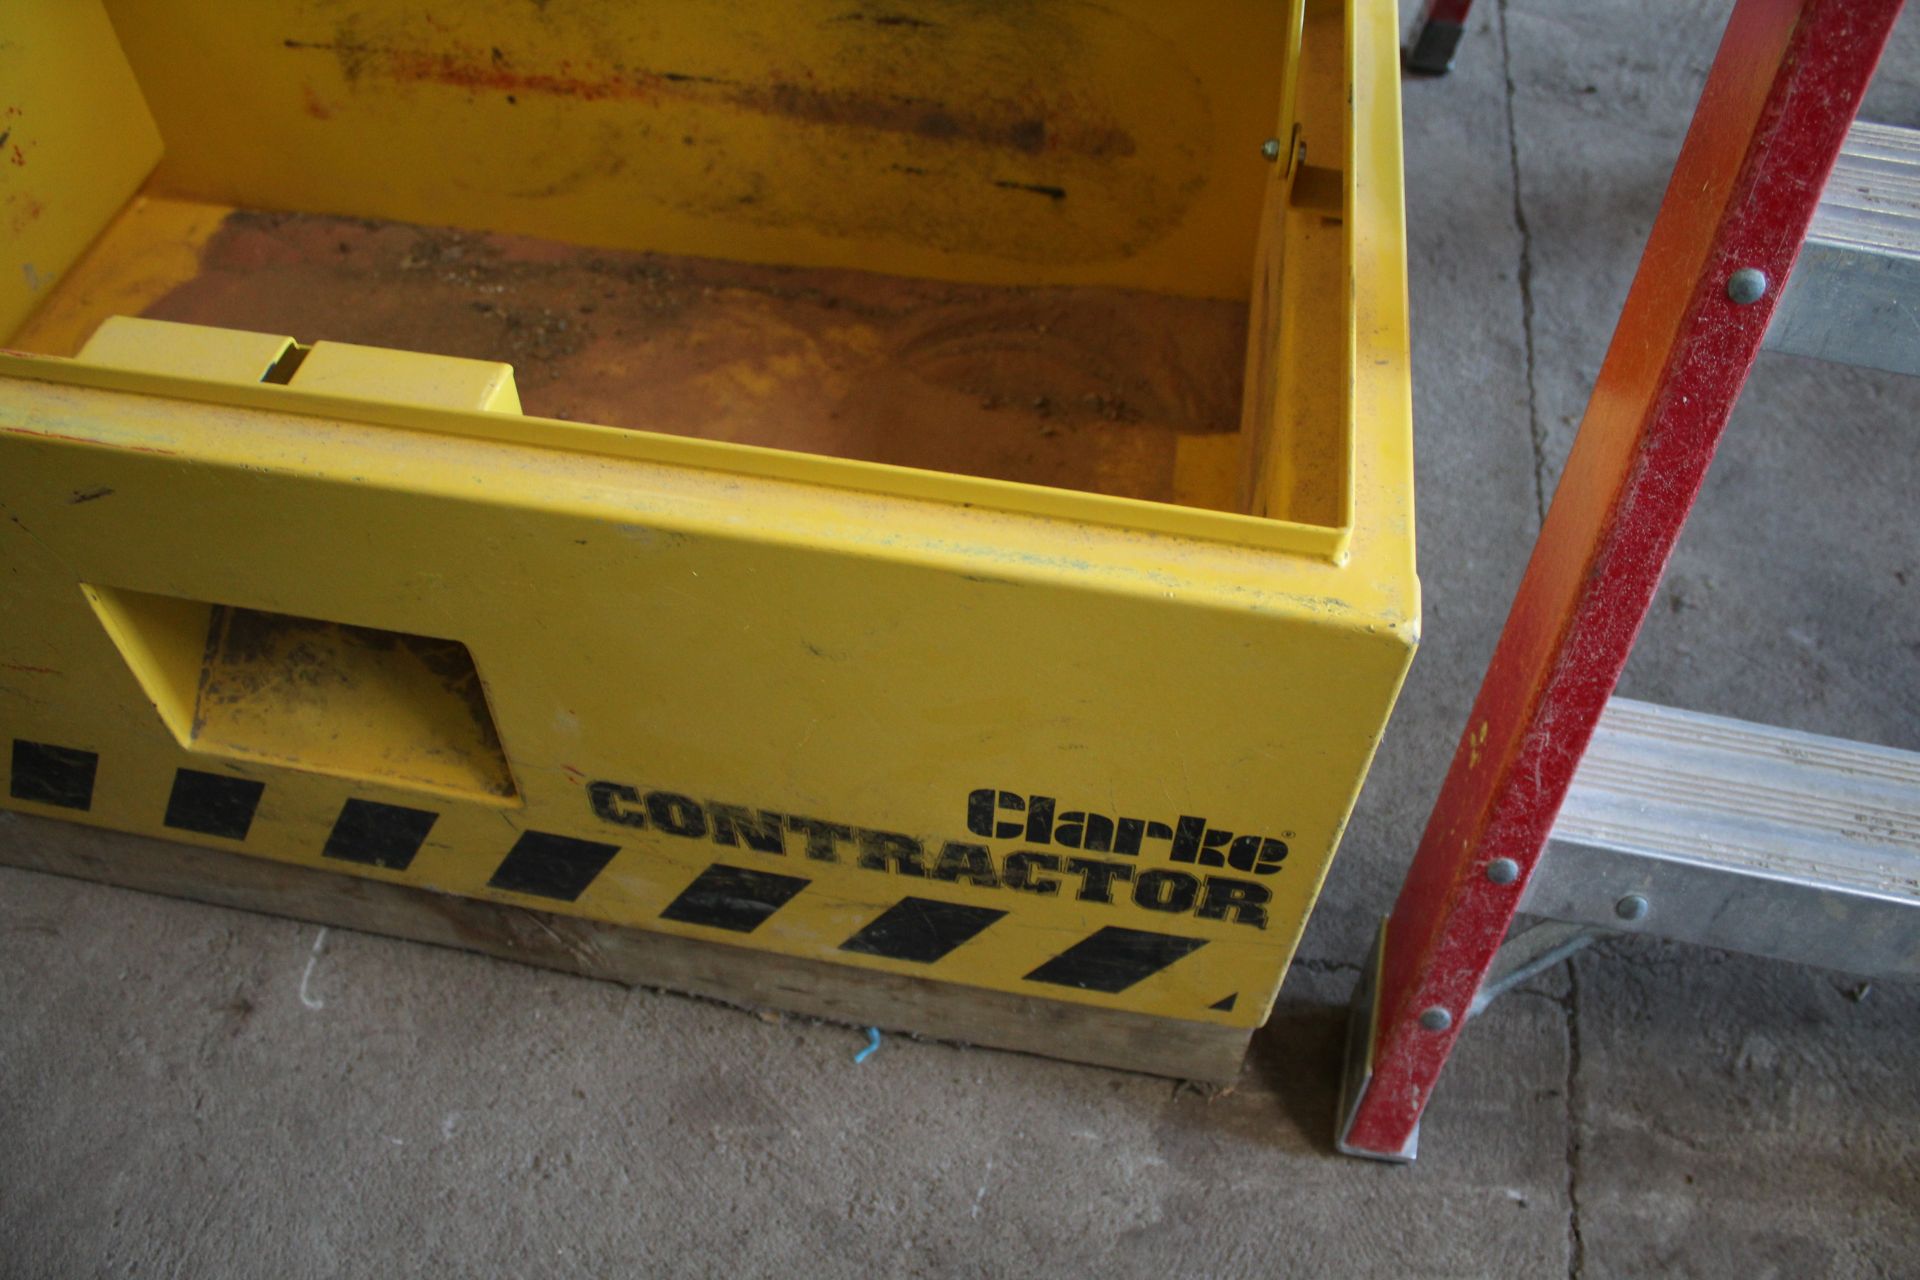 Clarke Contractor secure toolbox. V CAMPSEA ASHE - Image 3 of 6